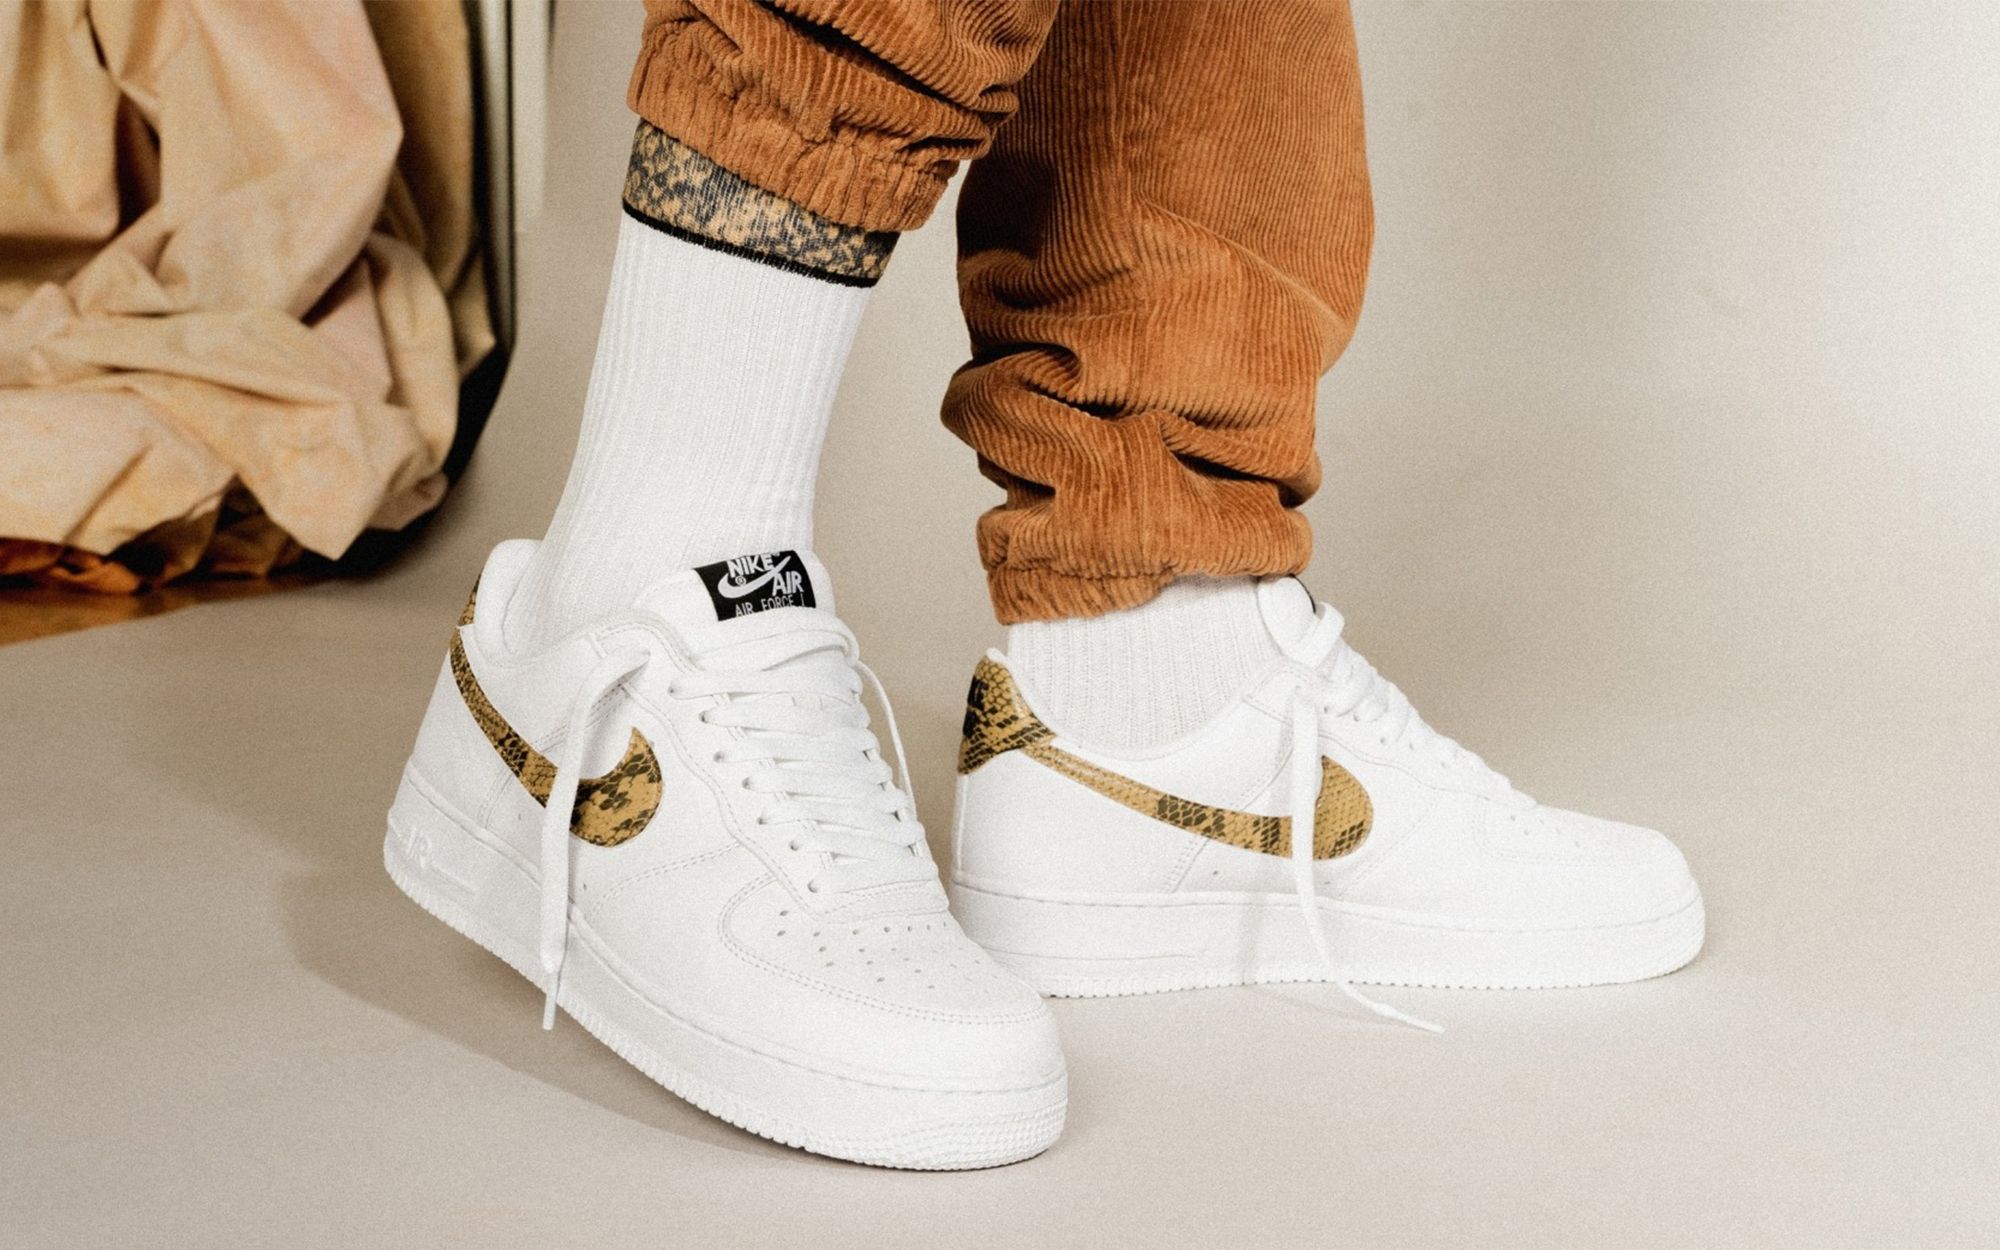 Where to Buy the Nike Air Force 1 PRM Ivory Snakeskin | House of Heat°